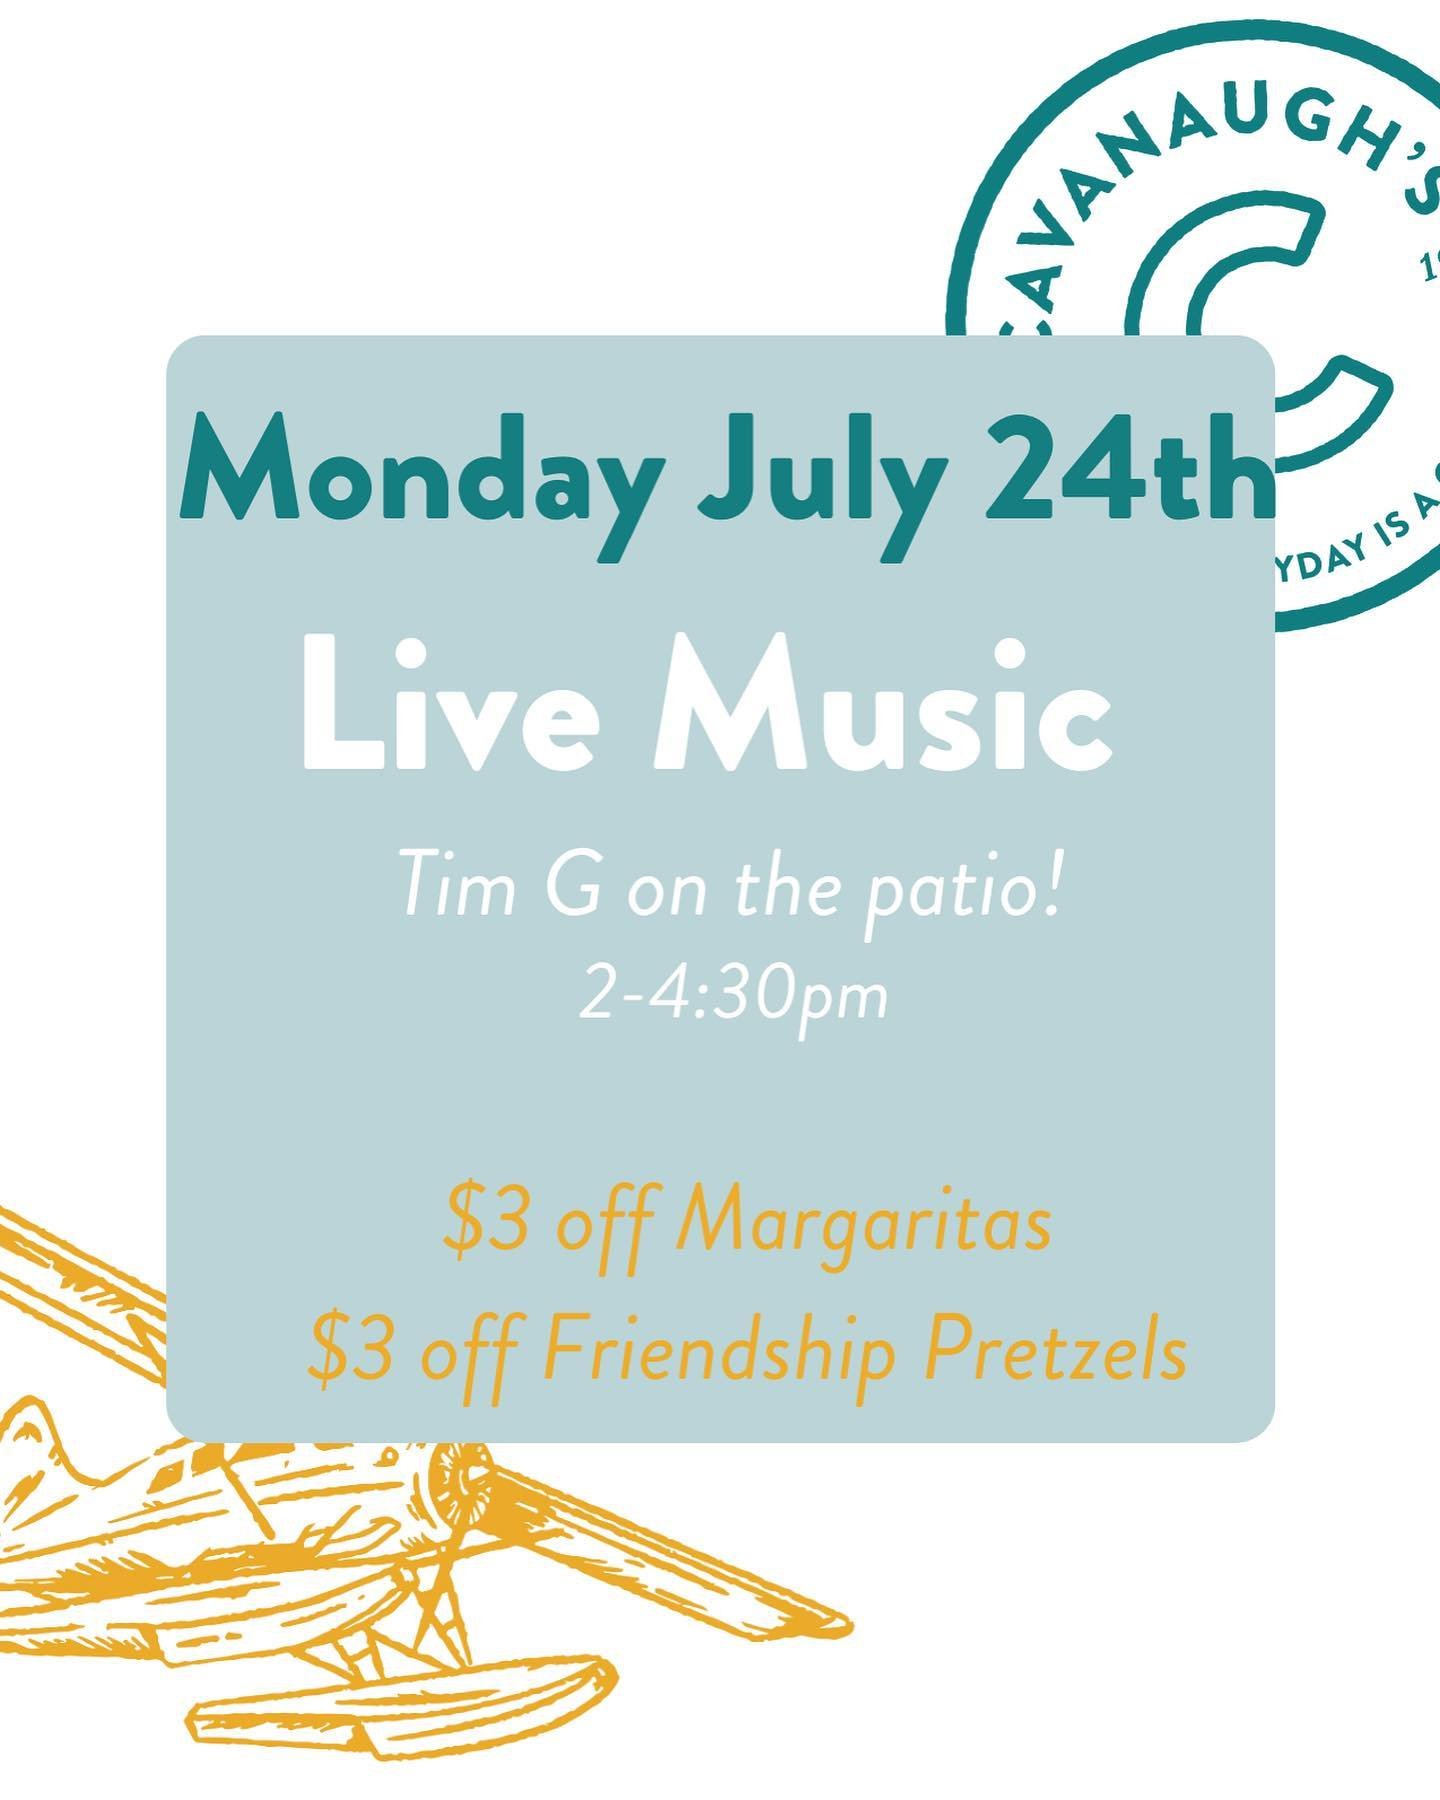 This week at Cavanaugh&rsquo;s ☀️ 

Monday - Music on the patio from 2-4:30! $3 off Margs &amp; Friendship Pretzels. 🎶 🥨 

Tuesday - Tiki Time! $3 off Cavs Tiki cocktails and Potstickers from 2-4:30pm 🌴🍹

Wednesday - Wine and Dine! $3 off house w